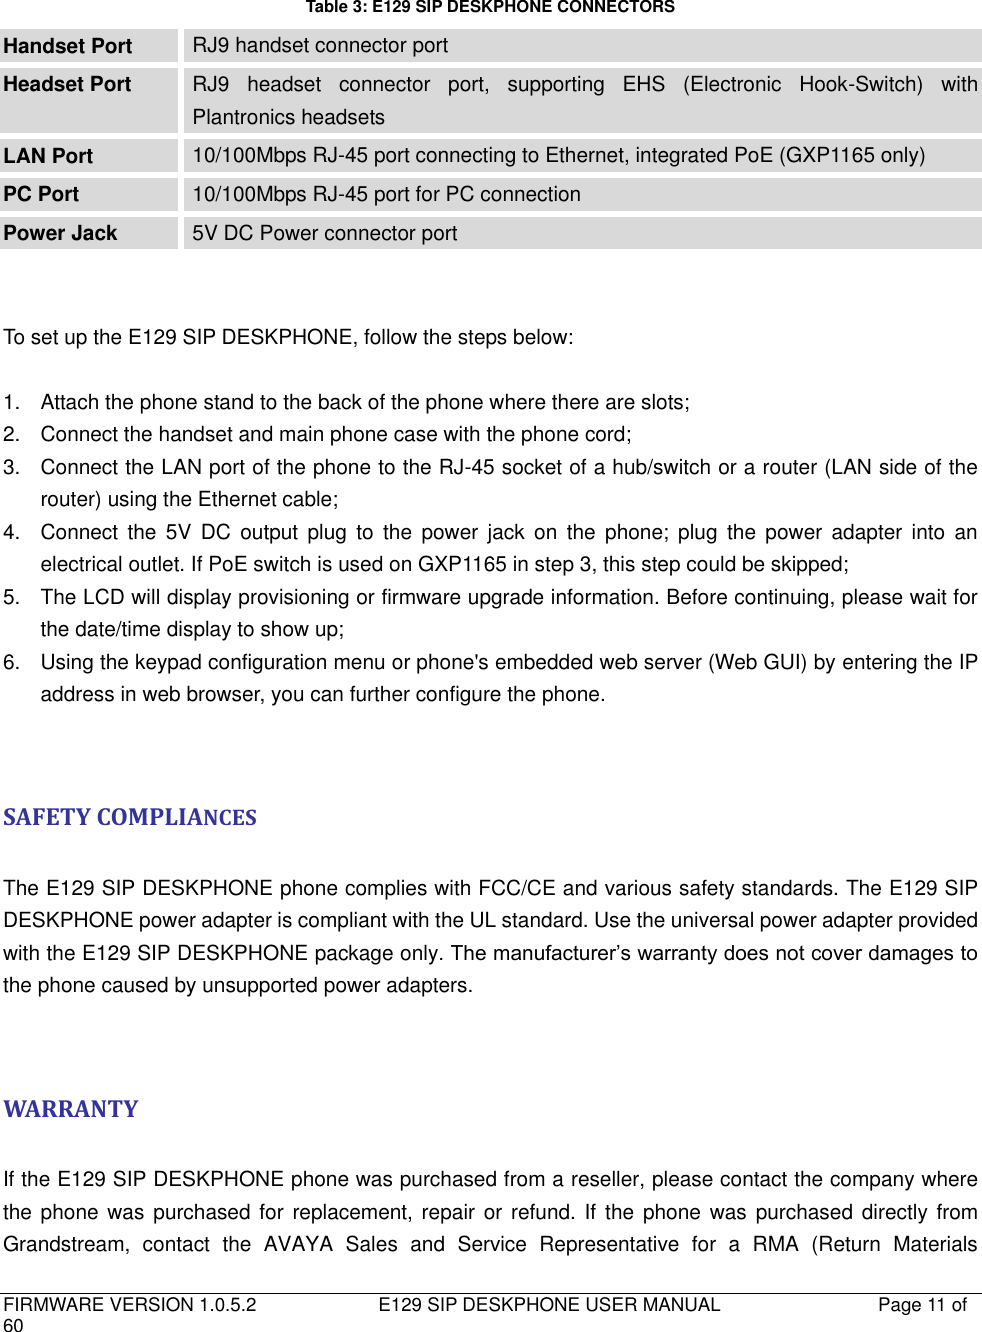   FIRMWARE VERSION 1.0.5.2                          E129 SIP DESKPHONE USER MANUAL           Page 11 of 60                                    Table 3: E129 SIP DESKPHONE CONNECTORS Handset Port RJ9 handset connector port Headset Port RJ9  headset  connector  port,  supporting  EHS  (Electronic  Hook-Switch)  with Plantronics headsets LAN Port 10/100Mbps RJ-45 port connecting to Ethernet, integrated PoE (GXP1165 only) PC Port 10/100Mbps RJ-45 port for PC connection Power Jack 5V DC Power connector port   To set up the E129 SIP DESKPHONE, follow the steps below:  1.  Attach the phone stand to the back of the phone where there are slots; 2.  Connect the handset and main phone case with the phone cord; 3.  Connect the LAN port of the phone to the RJ-45 socket of a hub/switch or a router (LAN side of the router) using the Ethernet cable; 4.  Connect the  5V  DC  output  plug  to  the  power  jack  on  the  phone;  plug  the  power  adapter  into  an electrical outlet. If PoE switch is used on GXP1165 in step 3, this step could be skipped; 5.  The LCD will display provisioning or firmware upgrade information. Before continuing, please wait for the date/time display to show up; 6.  Using the keypad configuration menu or phone&apos;s embedded web server (Web GUI) by entering the IP address in web browser, you can further configure the phone.   SAFETY COMPLIANCES  The E129 SIP DESKPHONE phone complies with FCC/CE and various safety standards. The E129 SIP DESKPHONE power adapter is compliant with the UL standard. Use the universal power adapter provided with the E129 SIP DESKPHONE package only. The manufacturer’s warranty does not cover damages to the phone caused by unsupported power adapters.   WARRANTY  If the E129 SIP DESKPHONE phone was purchased from a reseller, please contact the company where the phone was  purchased for  replacement, repair or refund. If  the phone was purchased directly from Grandstream,  contact  the  AVAYA  Sales  and  Service  Representative  for  a  RMA  (Return  Materials 